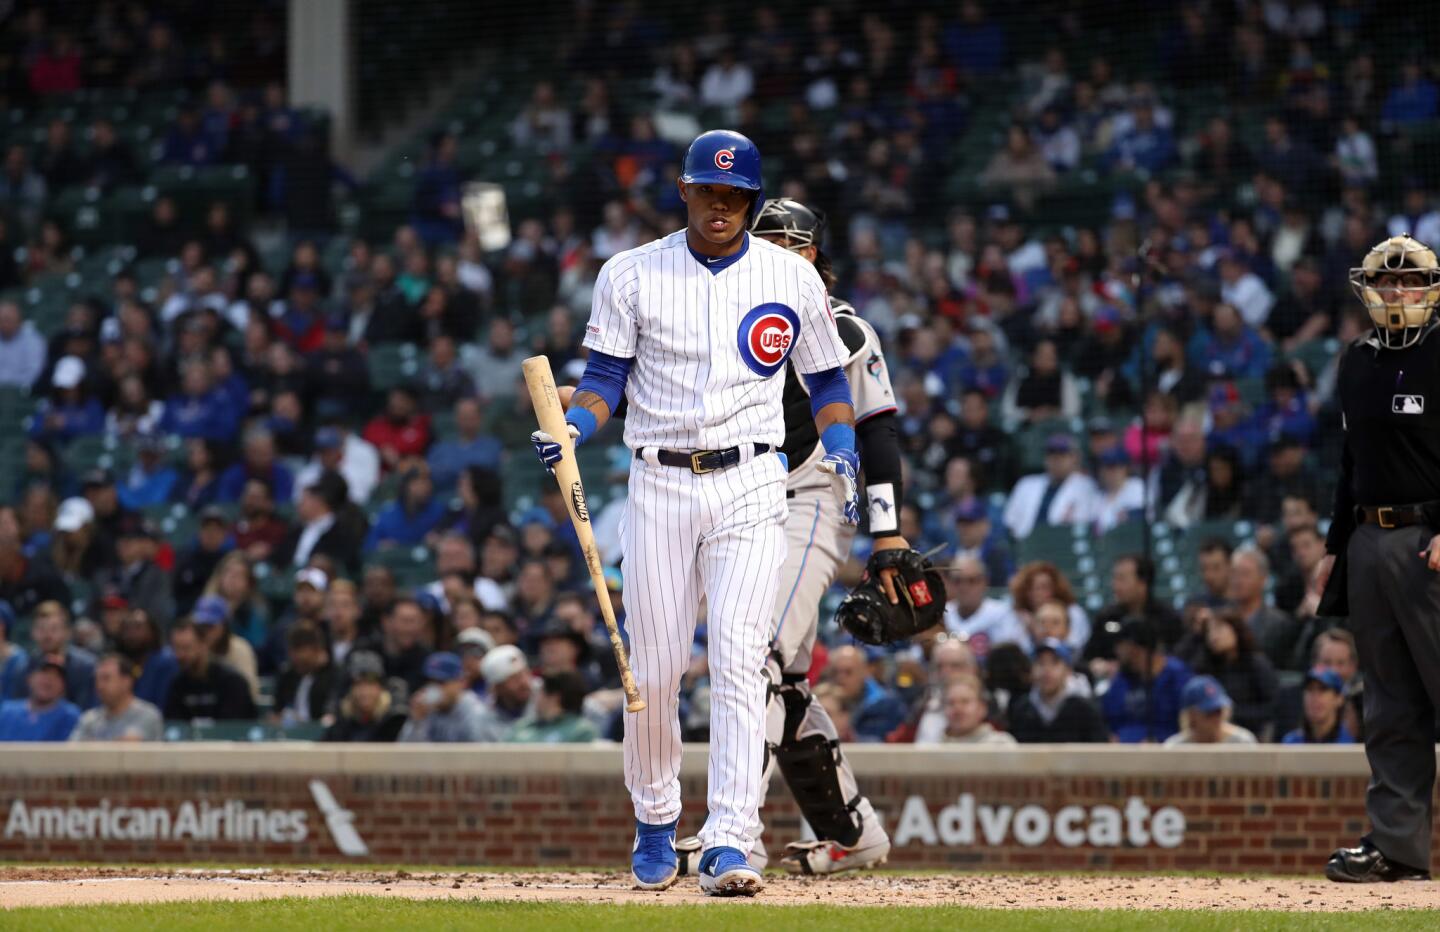 Cubs' Dexter Fowler Hits Home Run on Third Pitch of World Series Game 7